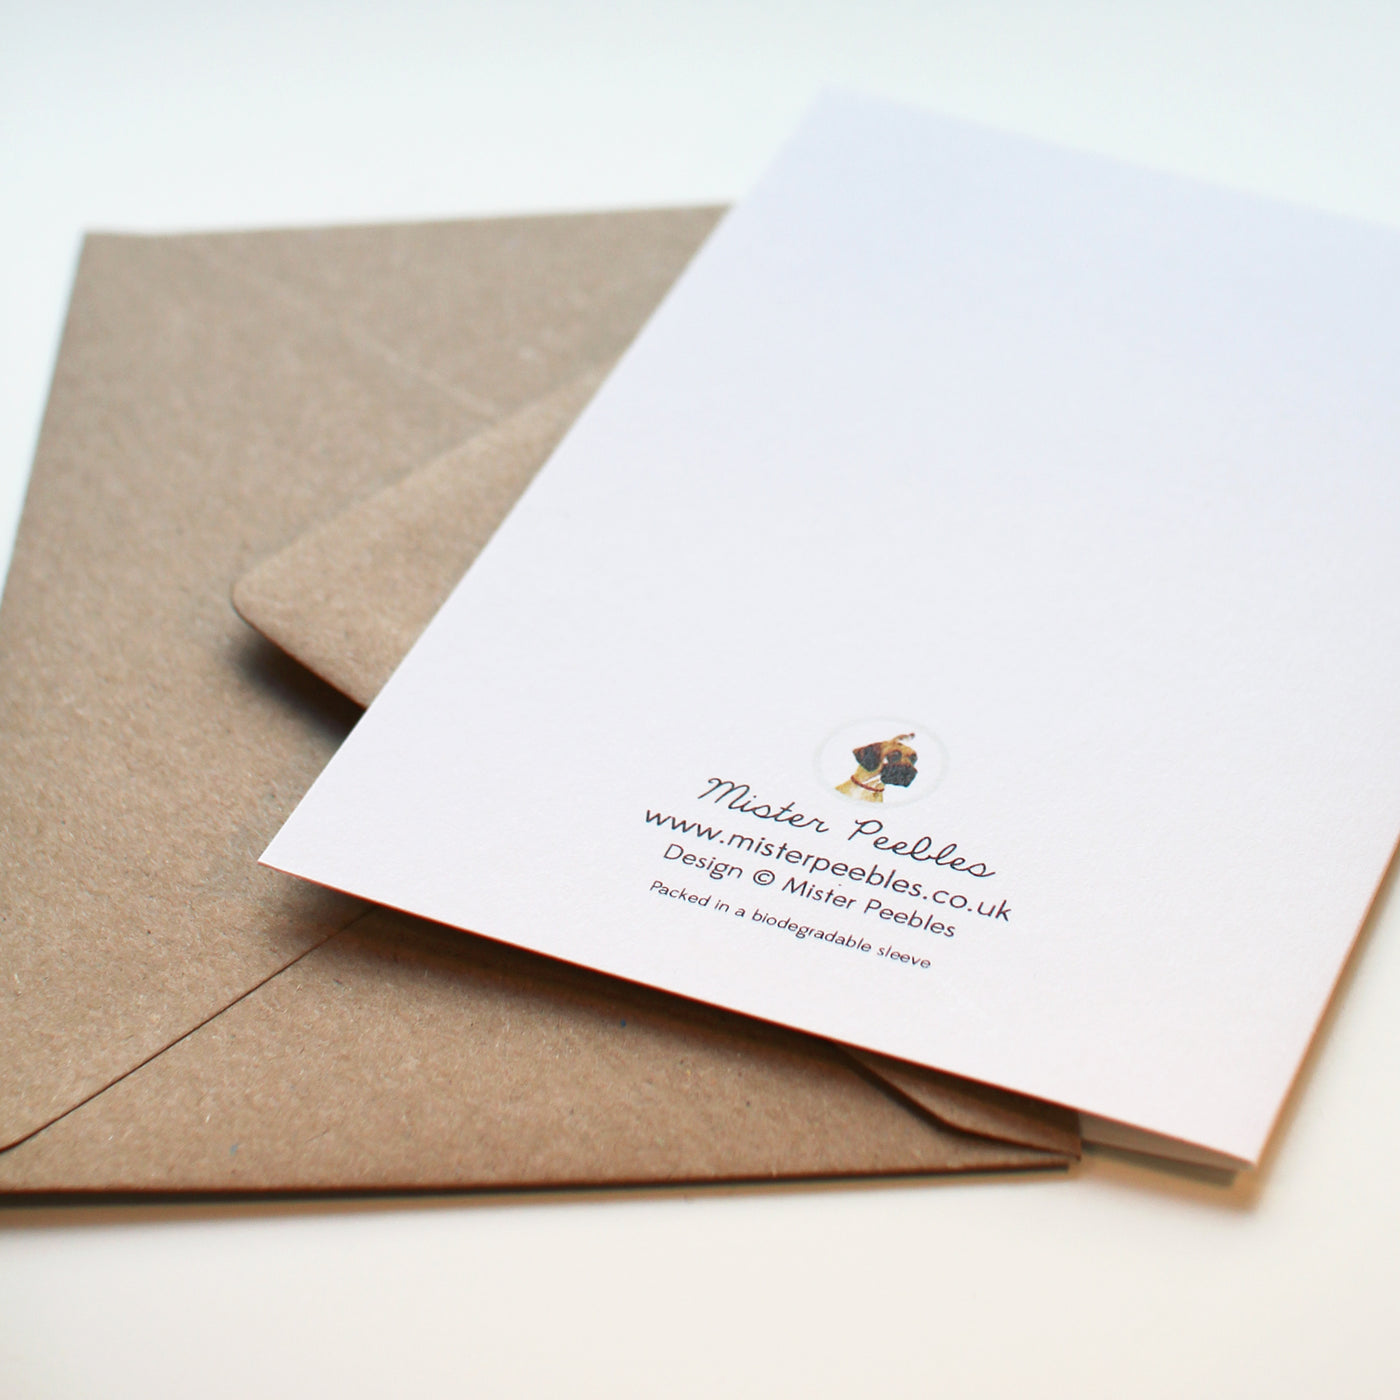 Reverse of the greetings card showing logo and packed in a biodegradable sleeve